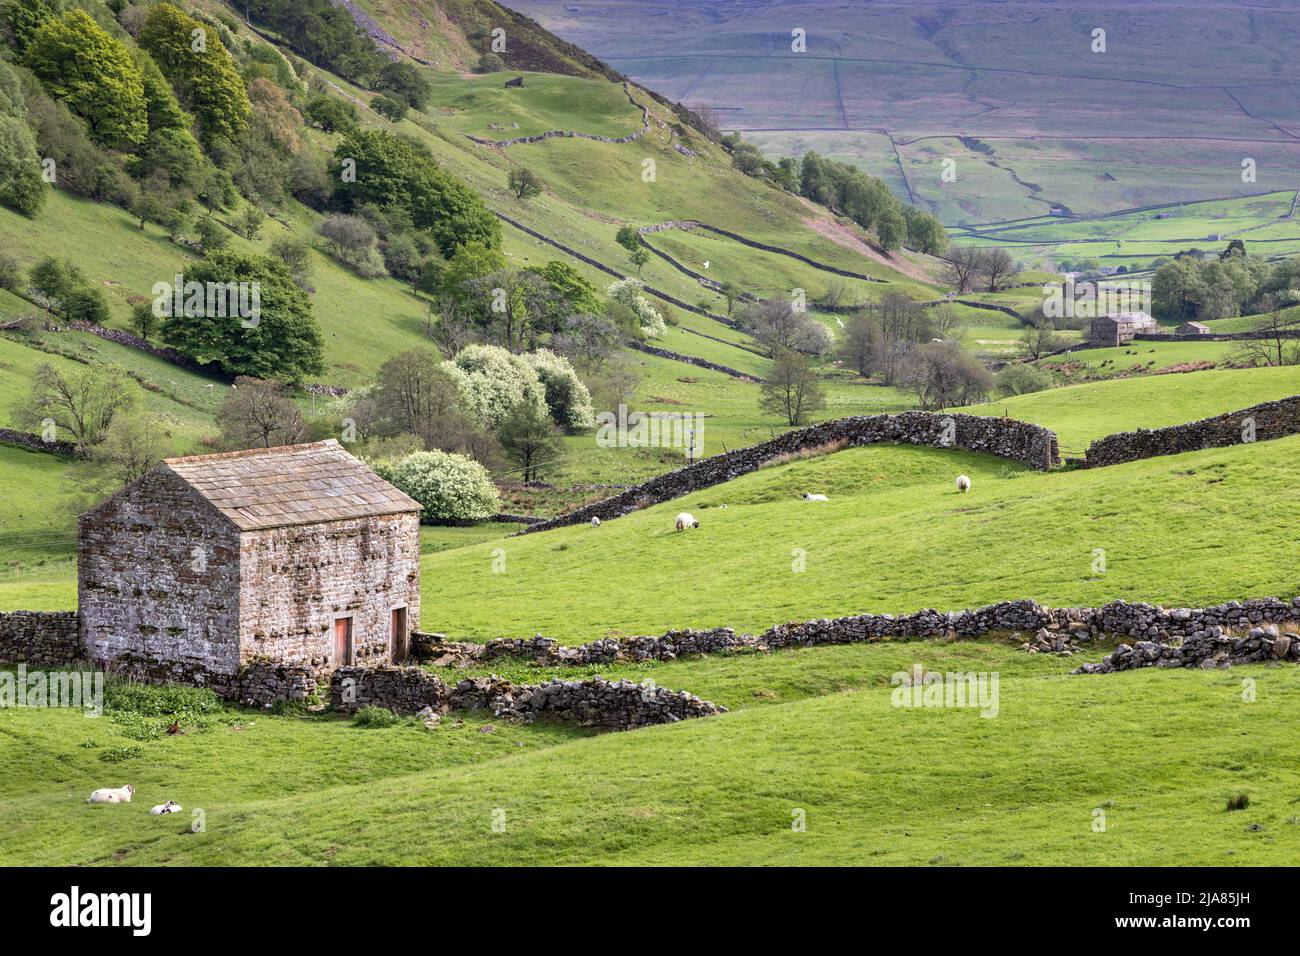 A typical stone barn and walls at Angram, set against the flanks of Kisdon Fell near Keld in Swaledale, Yorkshire Dales National Park, England, Uk Stock Photo